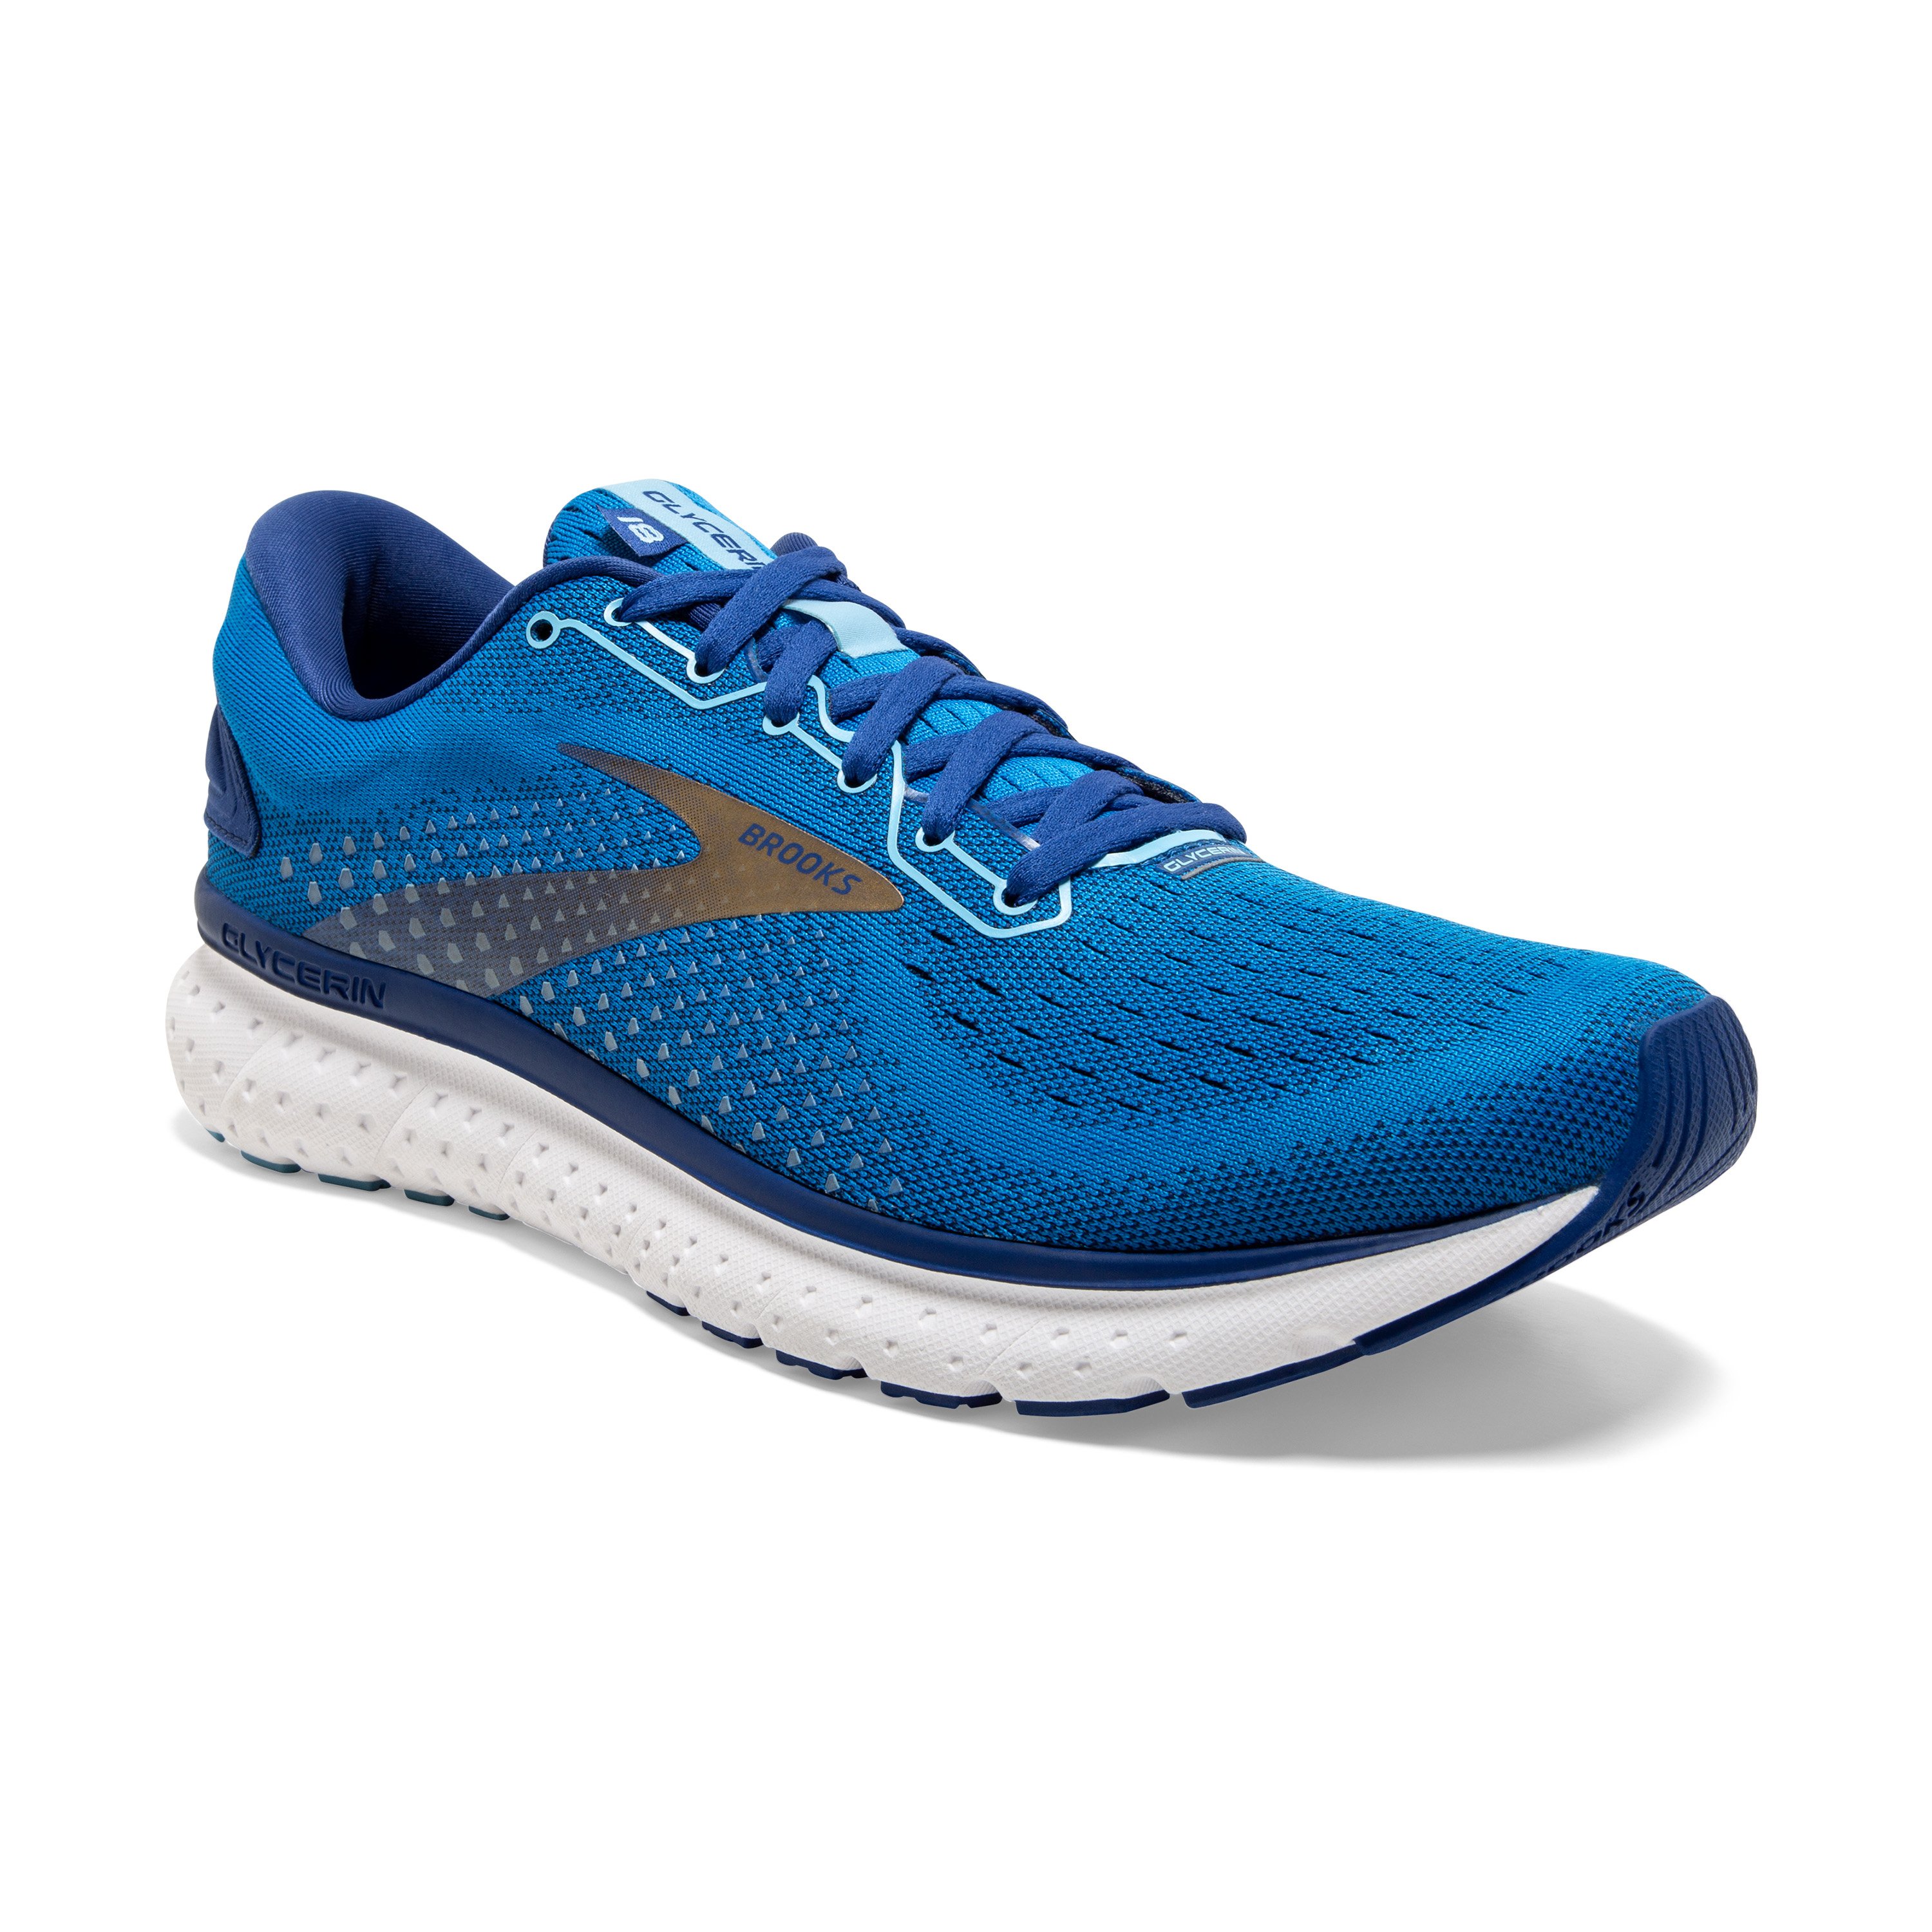 where can i buy brooks shoes online